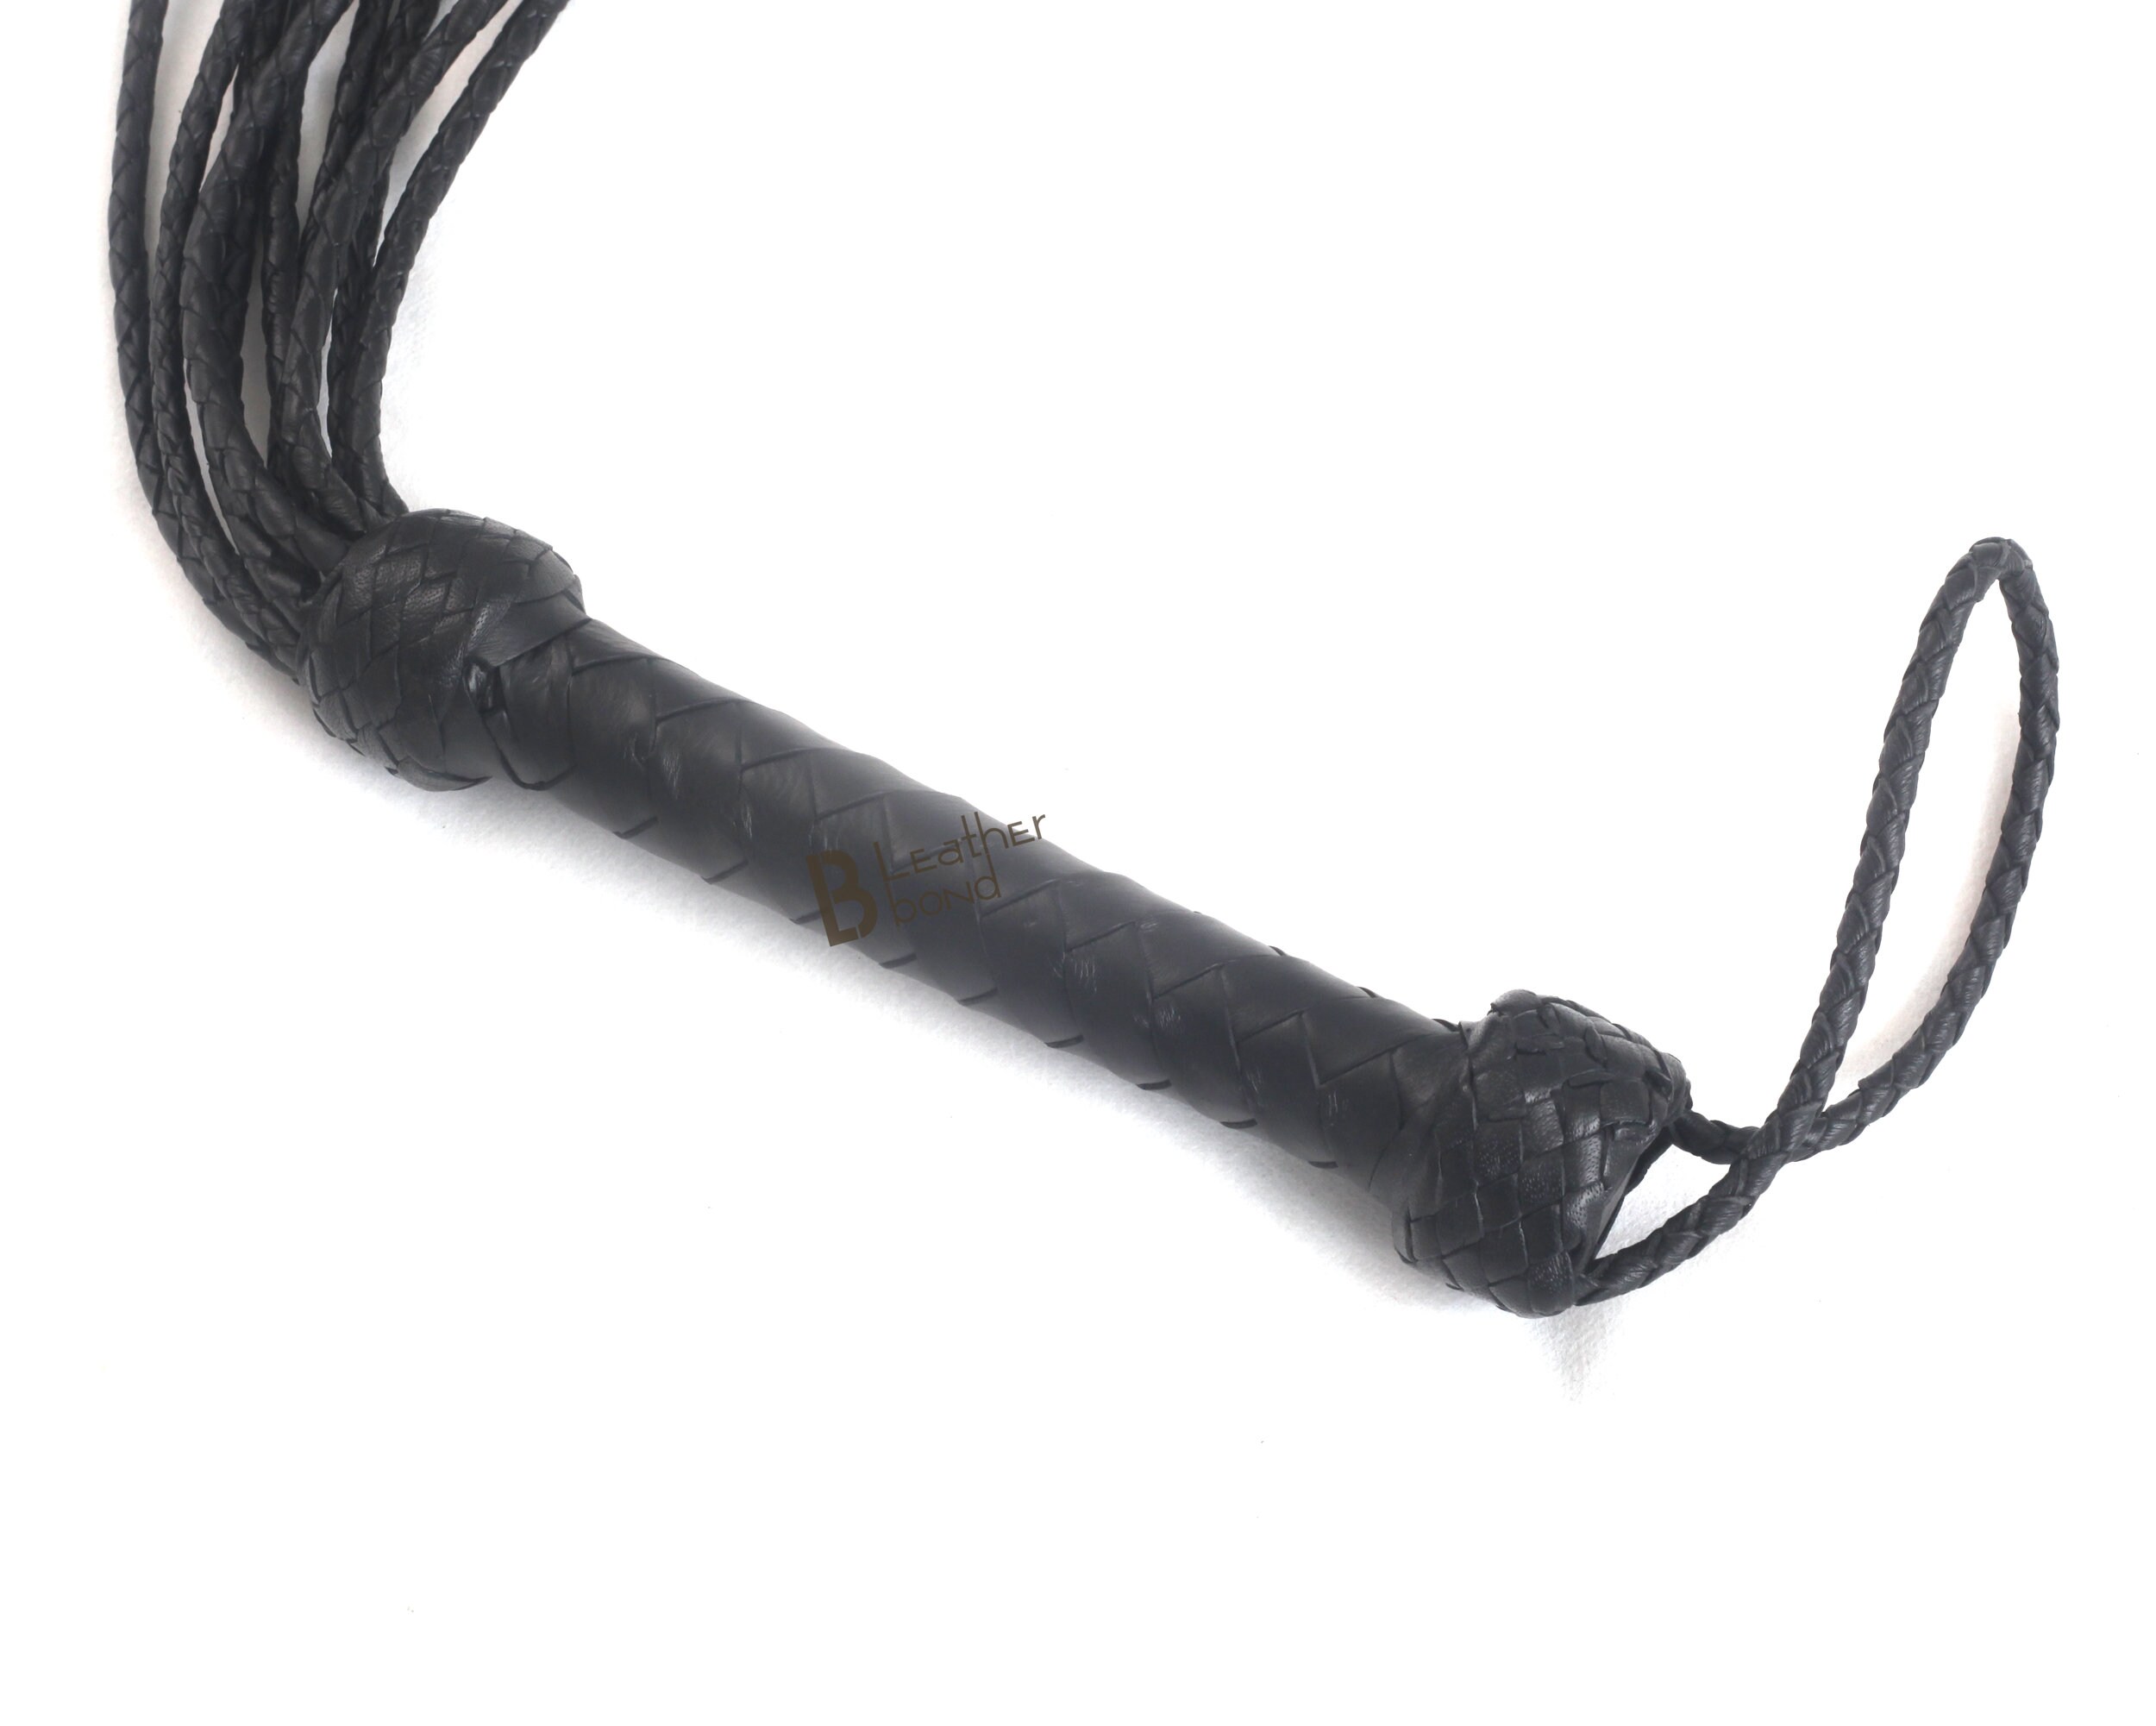 Black Cow Hide Leather Braided Flogger Cat O Nine Tails whip Heavy Duty Flogger 